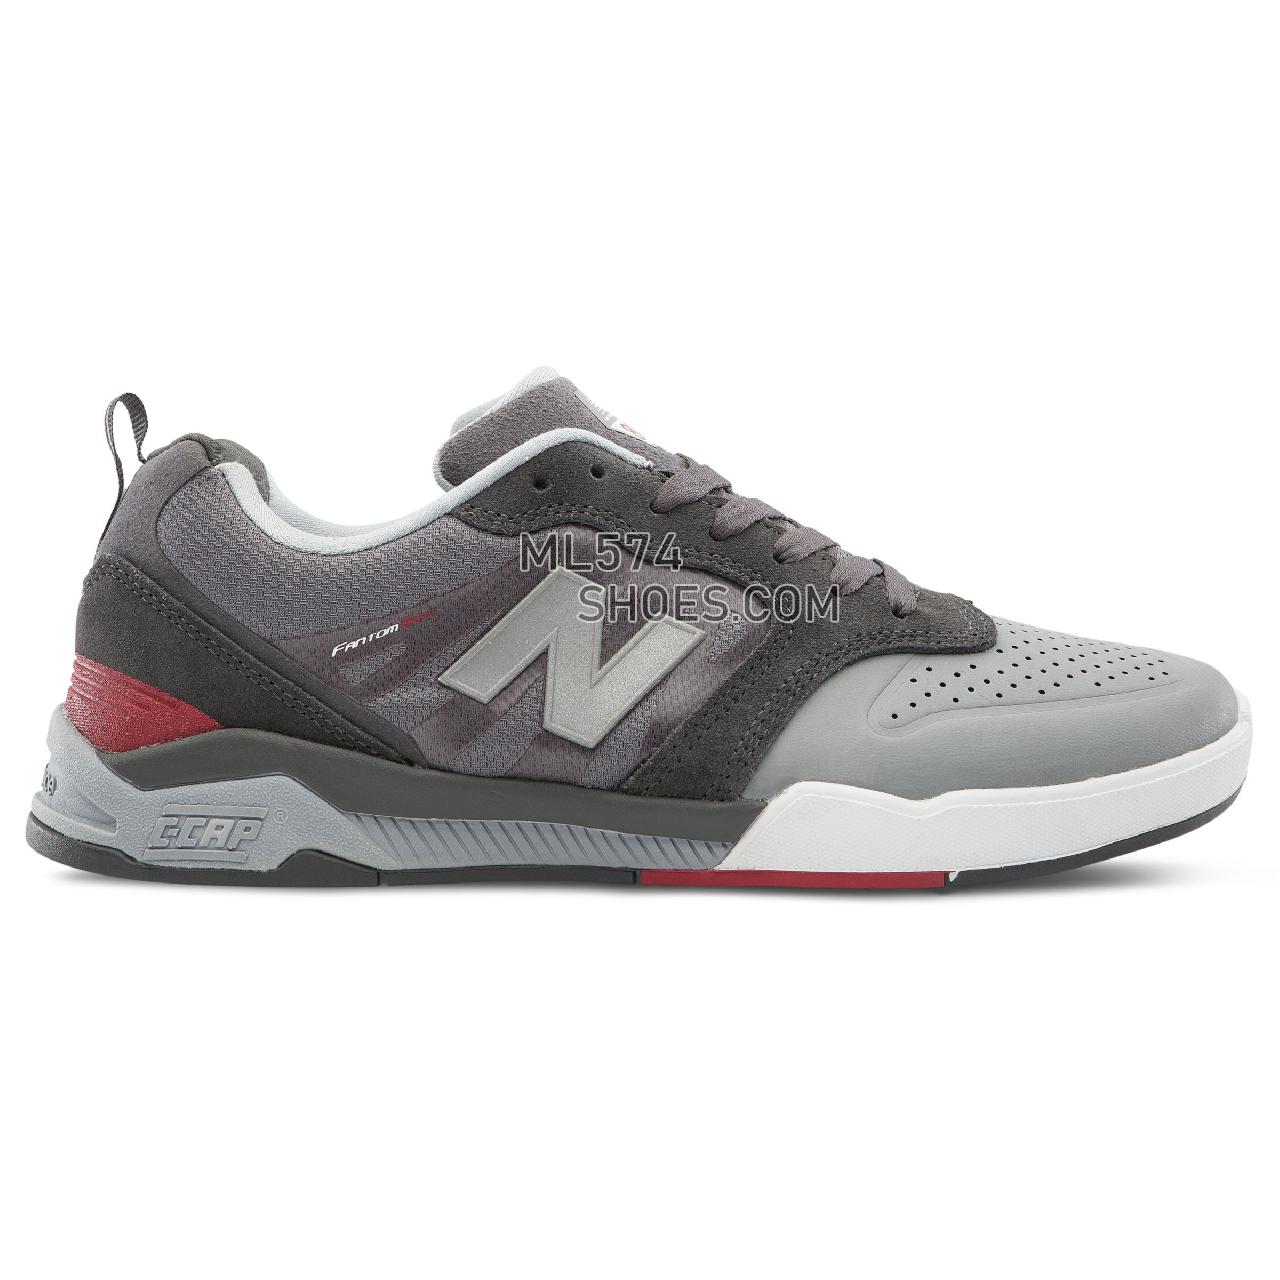 New Balance 868 - Men's 868 - Classic Phantom with Grey and Red - NM868LGR